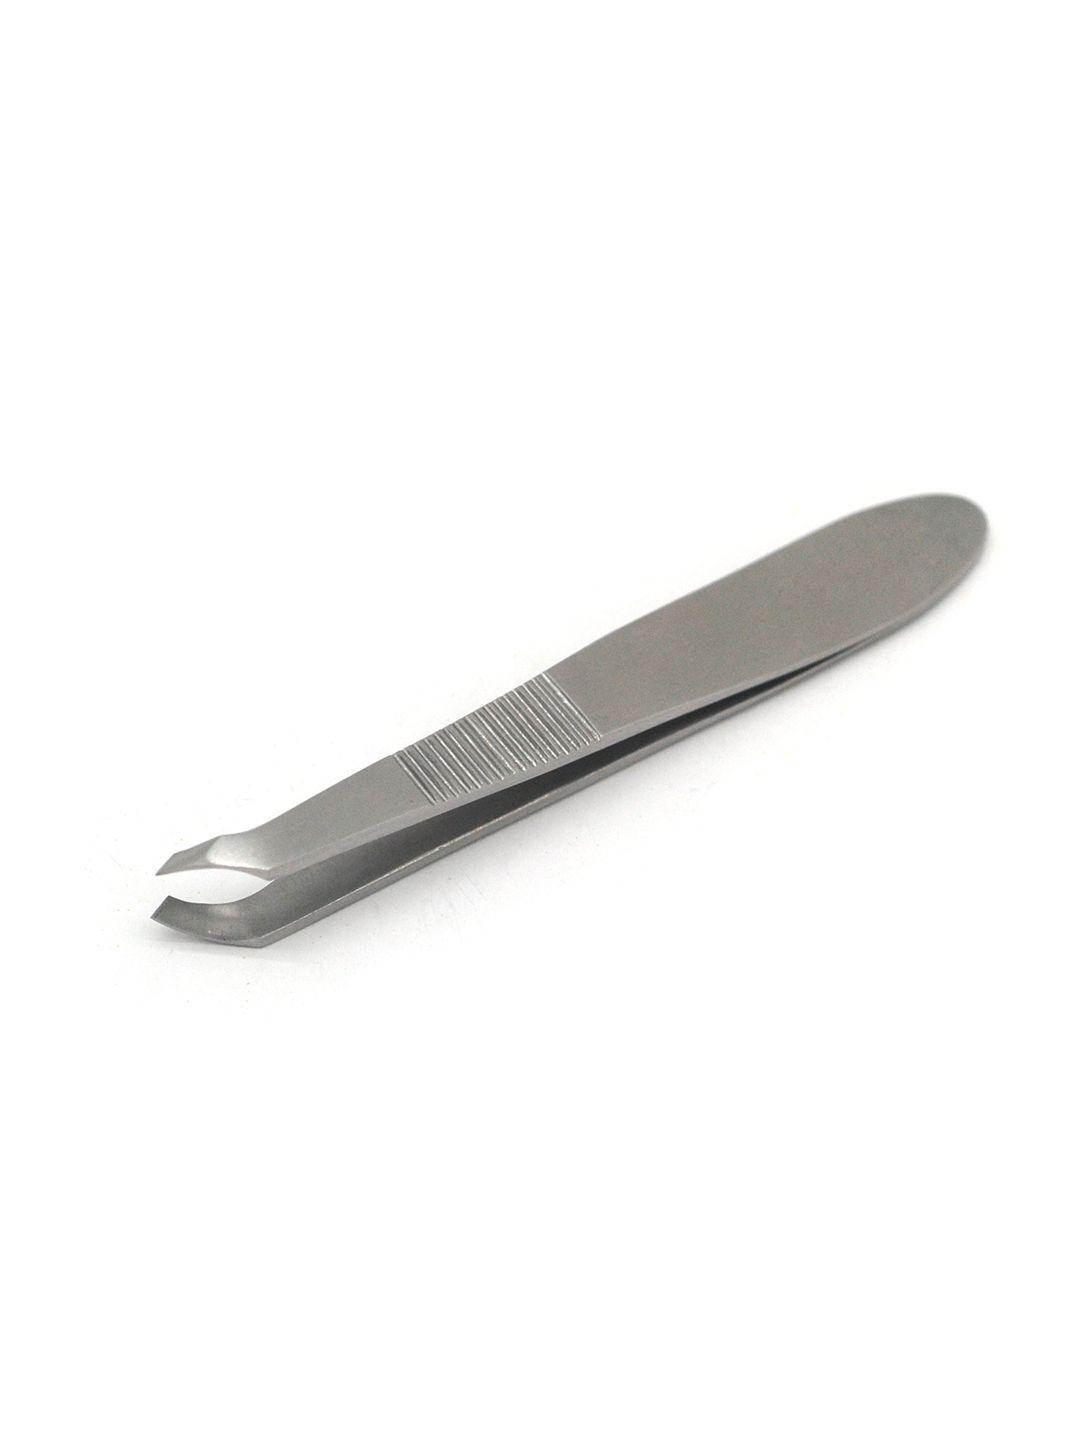 basicare-signature-stainless-steel-cuticle-tweezers-with-drawstring-pouch